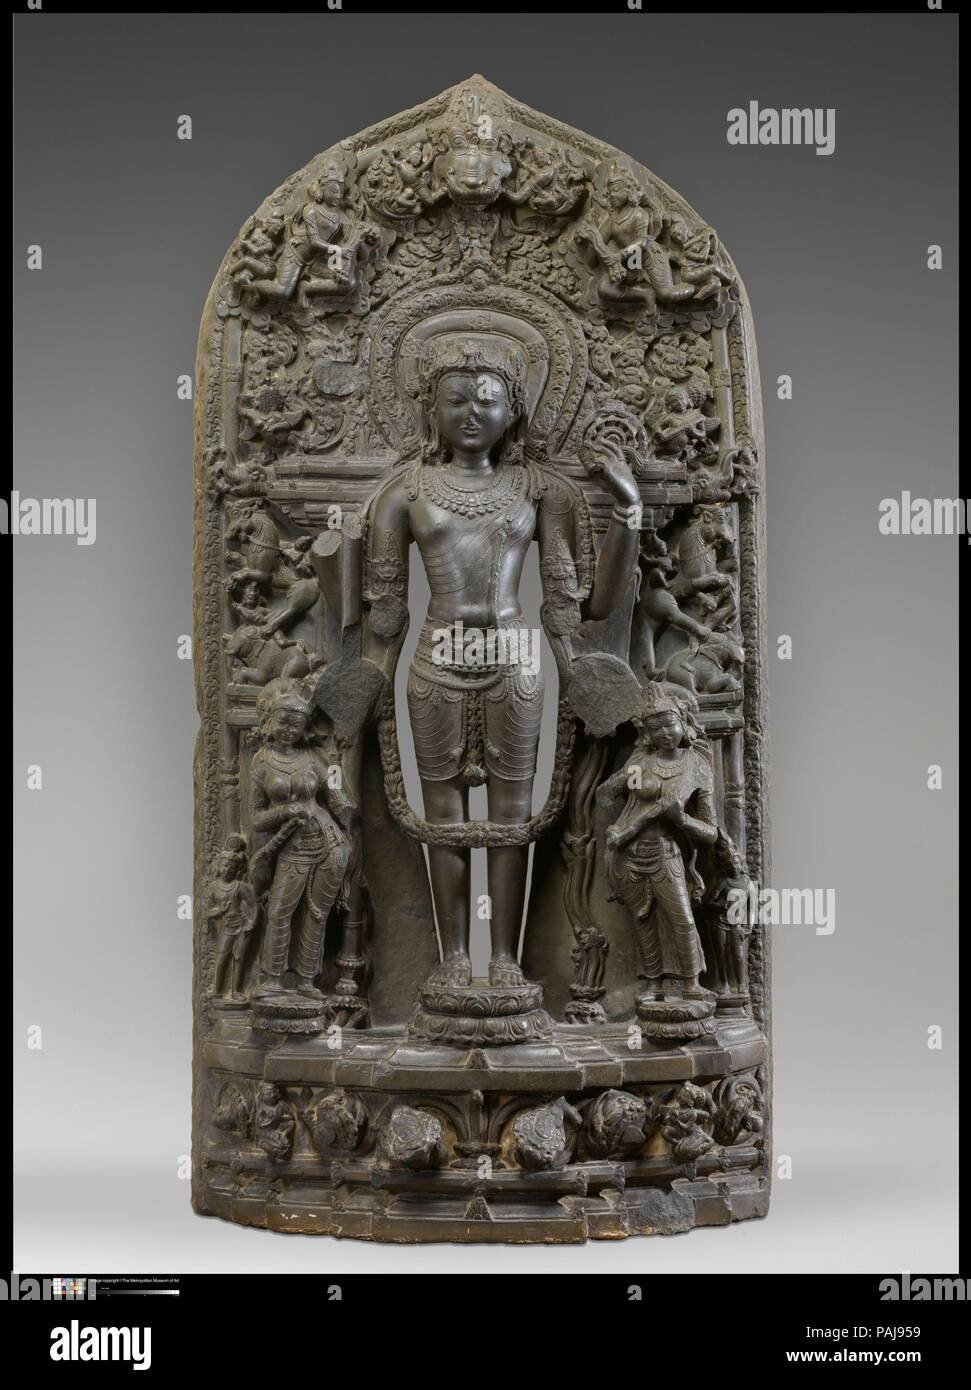 Vishnu Accompanied by Lakshmi and Sarasvati. Culture: Bangladesh. Dimensions: H. 47 in. (119.4 cm); W. 25 in. (63.5 cm); D. 9 in. (22.9 cm). Date: 12th century.  Vishnu stands in perfect symmetry (samapada), the protector of cosmic order. In an iconographic convention unique to medieval Bengal, he is accompanied by the goddesses Lakshmi, holding a fly-whisk (camara) and lotus (padma), and Sarasvati, playing a vina, rather than by his wives Sri Devi and Bhu Devi. He is also closely associated with Priti, the earth goddess, who often appears between his feet. The goddesses in turn are flanked by Stock Photo